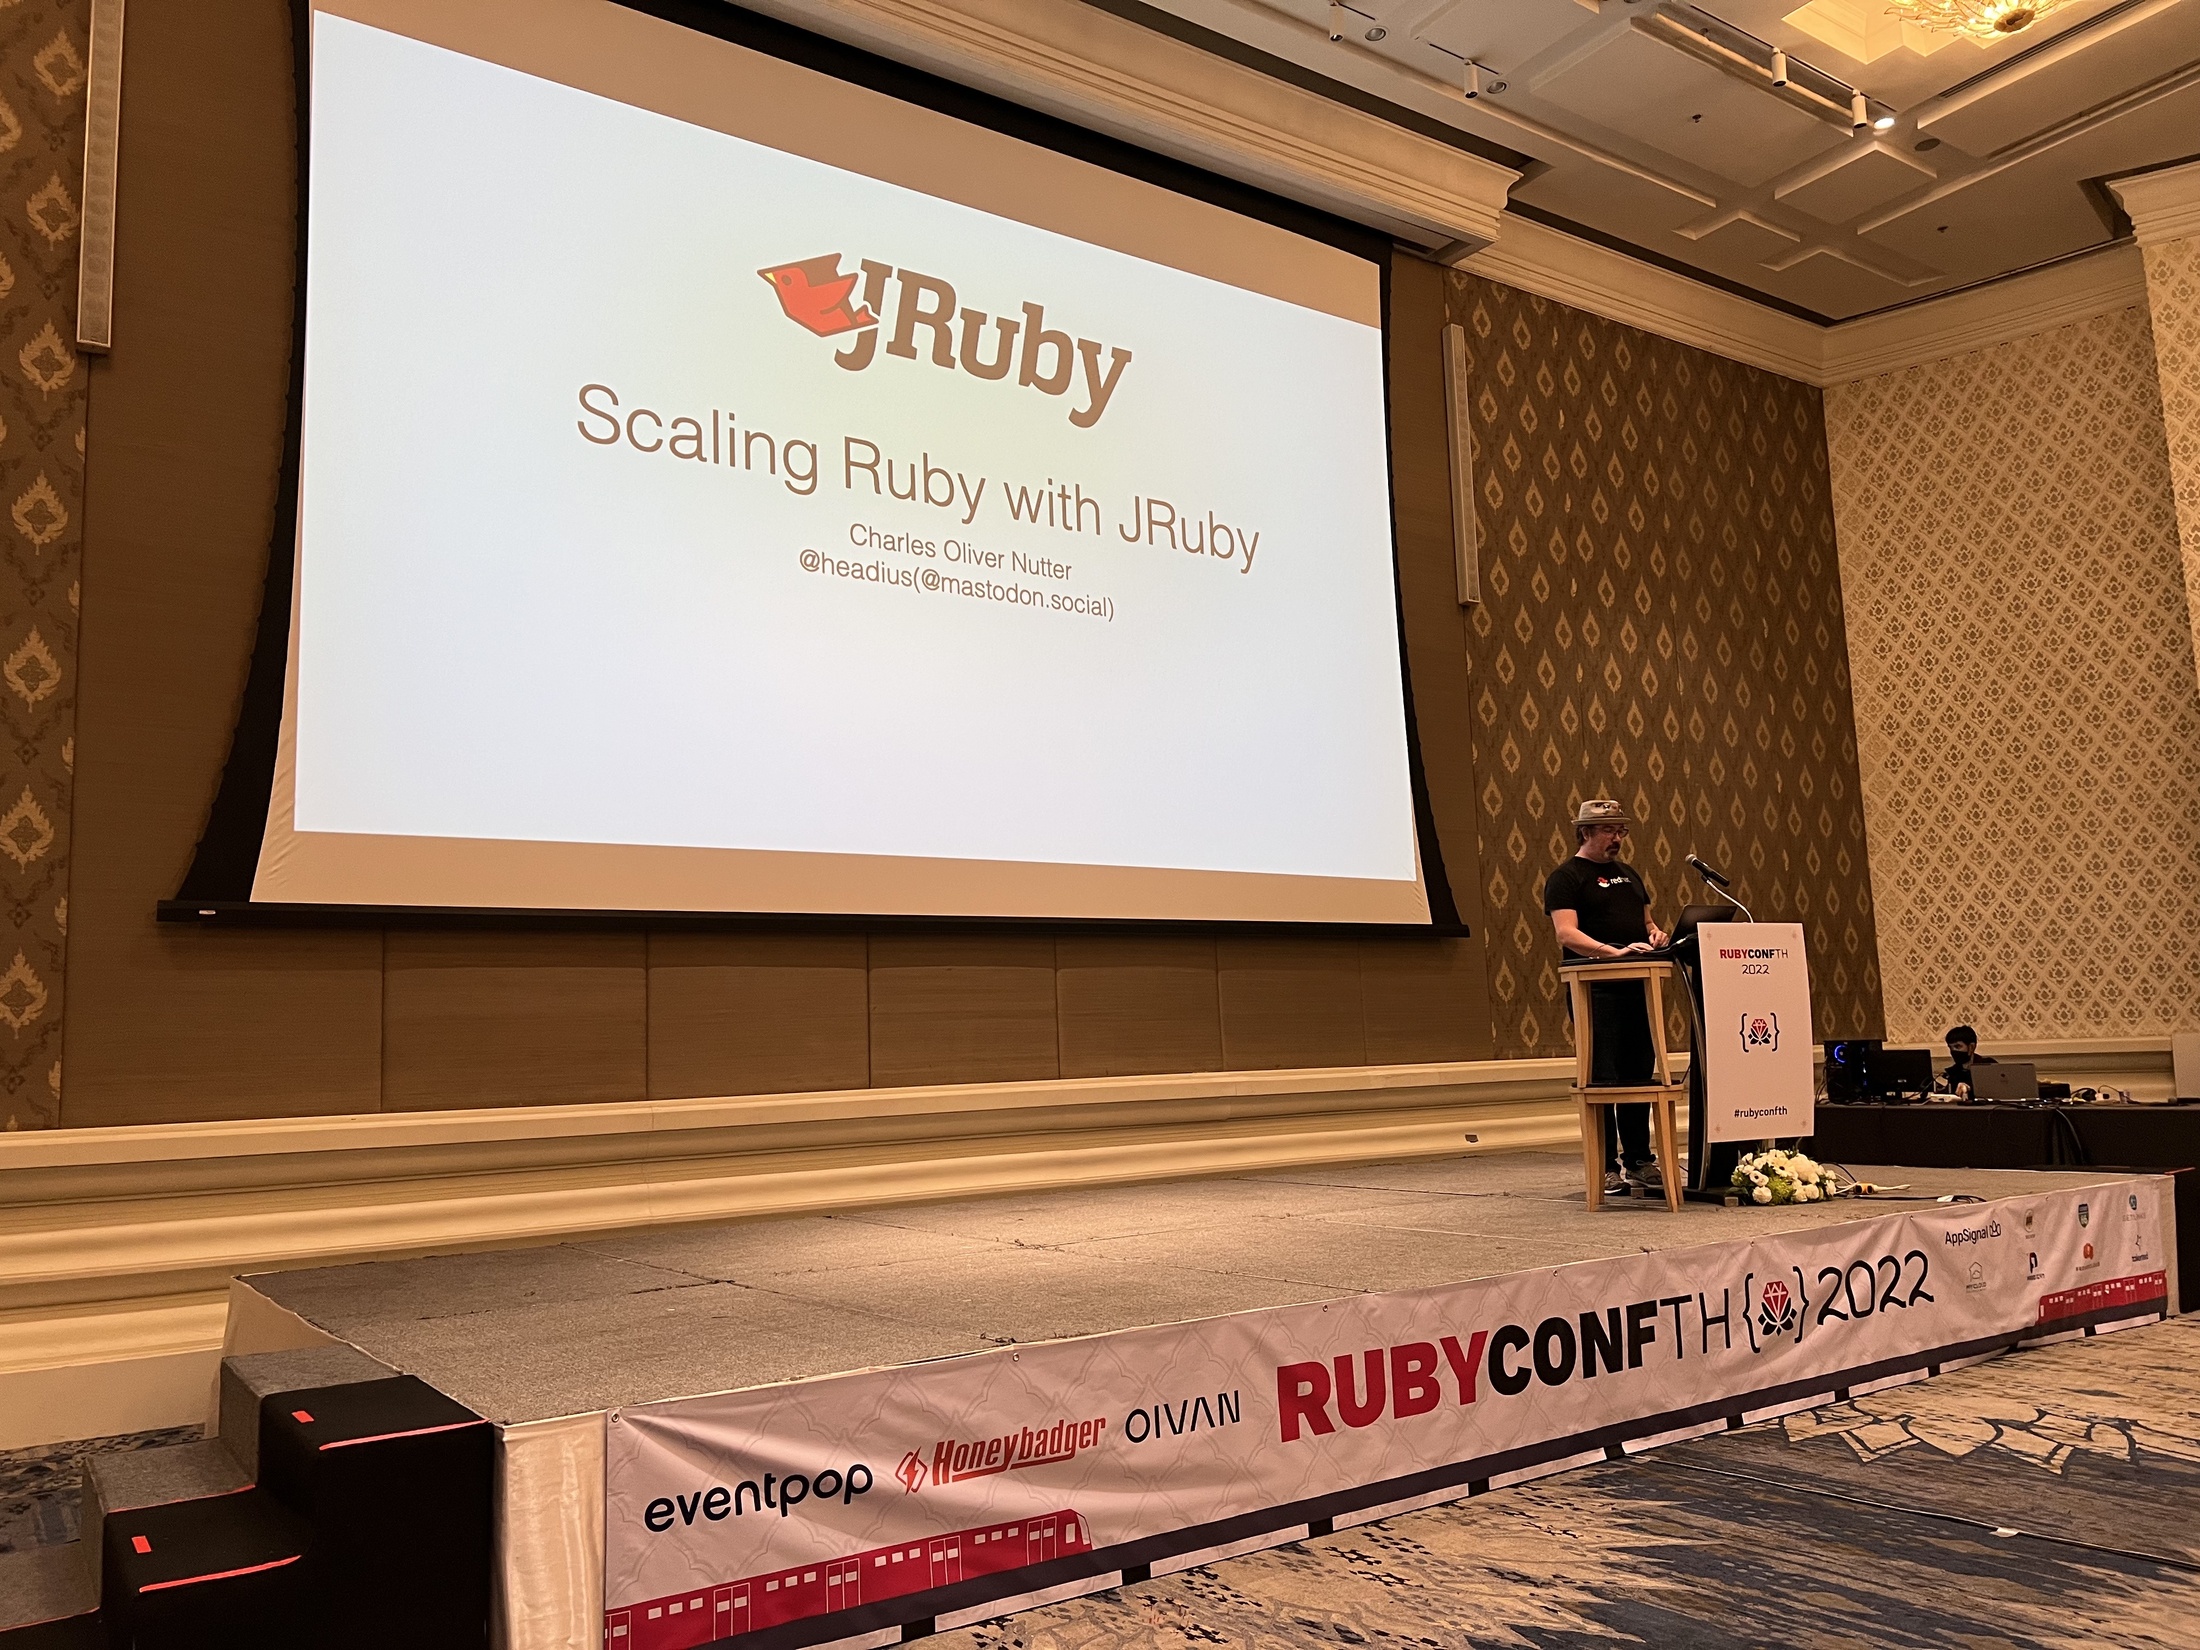 1 scaling ruby